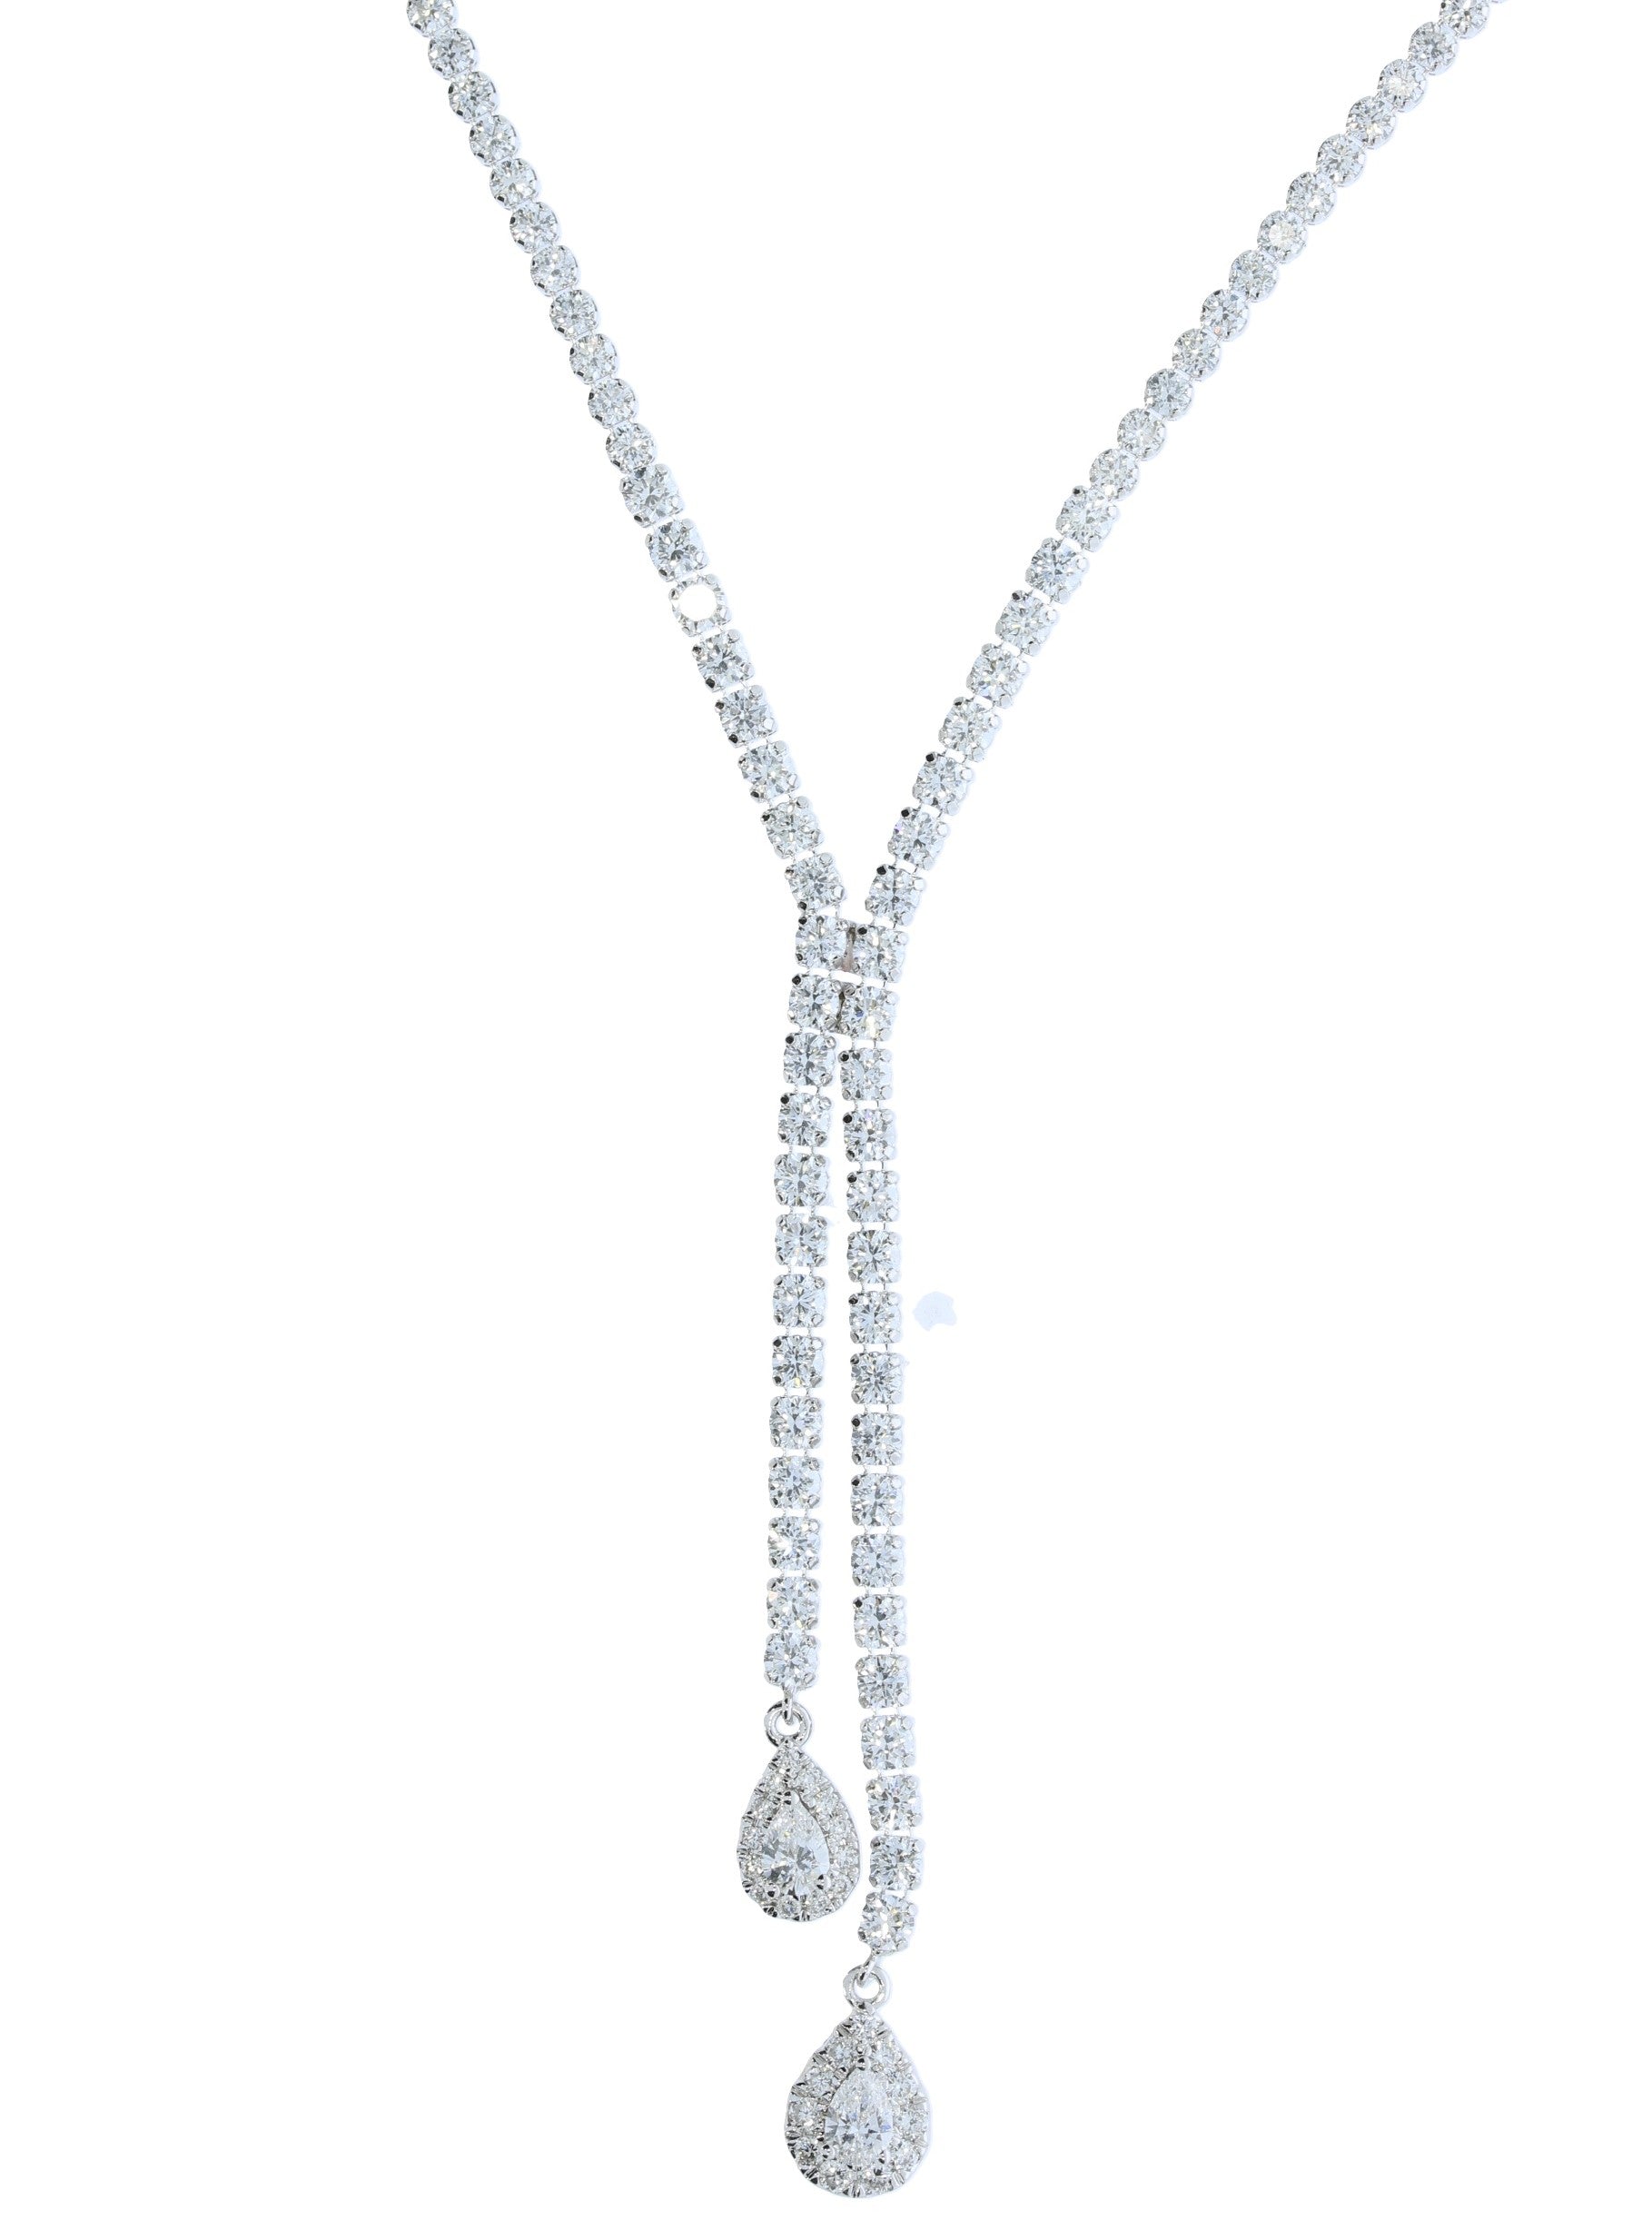 White Gold Lariat Style Diamond Necklace With Floating Pear Shape Halos - Diamond Necklaces